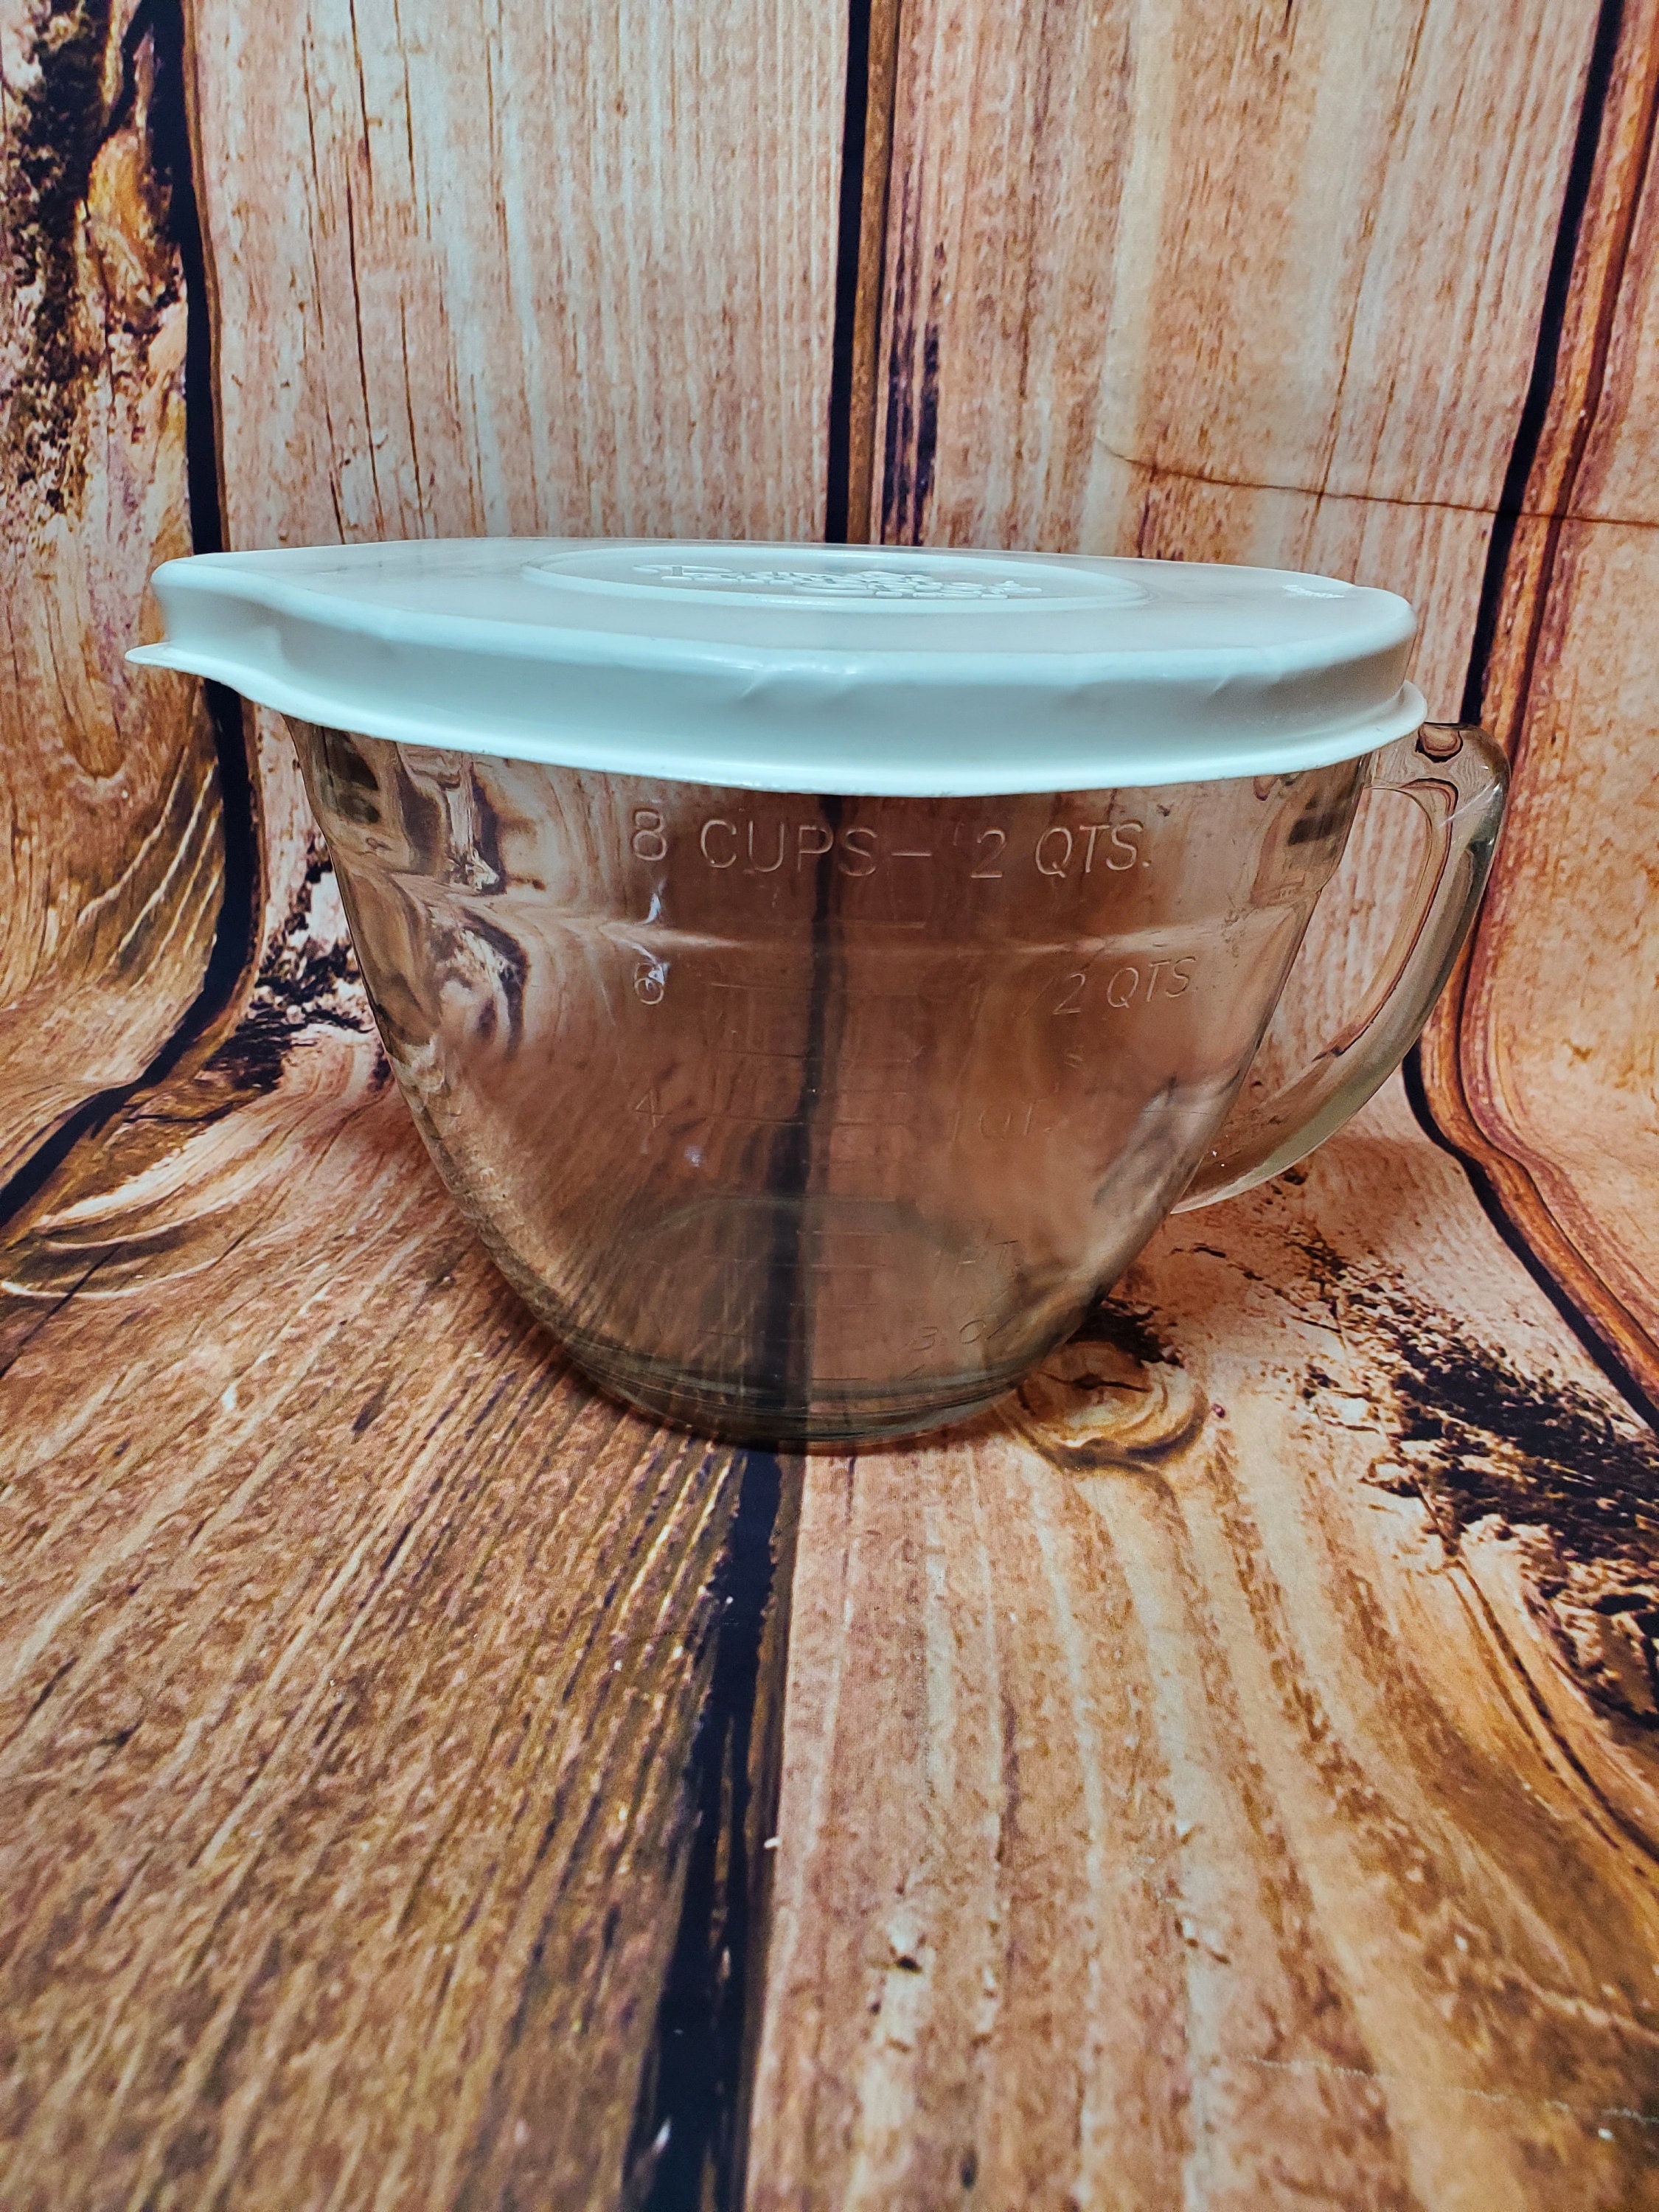 Batter and Mixing Bowl by the Pampered Chef, Vintage 2 Quart Glass  Measuring Bowl Baking and Cooking Utensils 